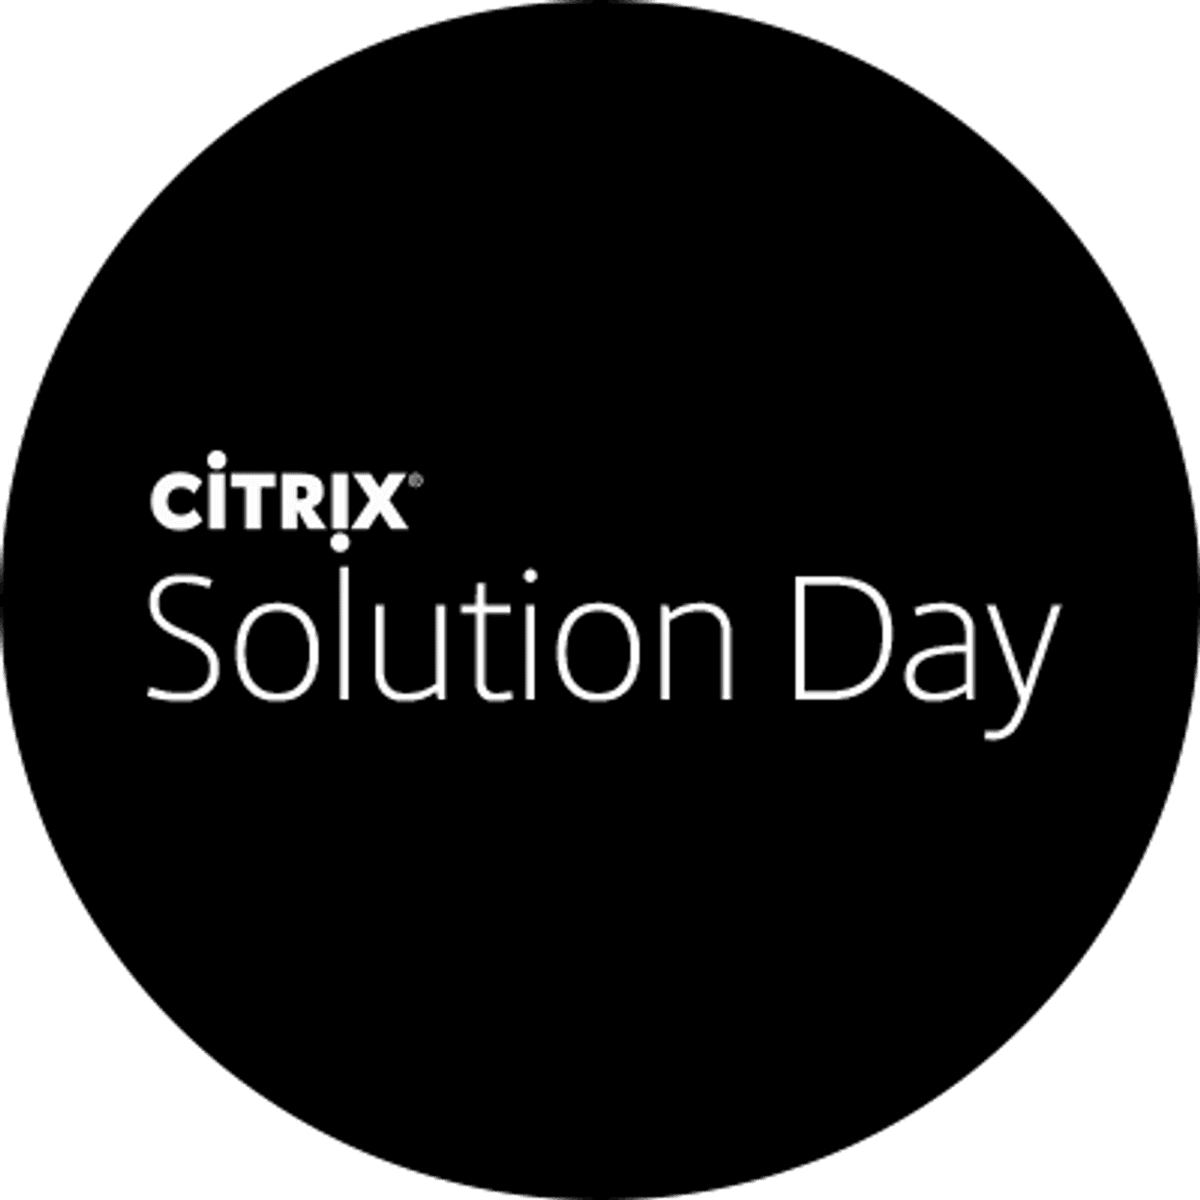 Citrix Solution Day image